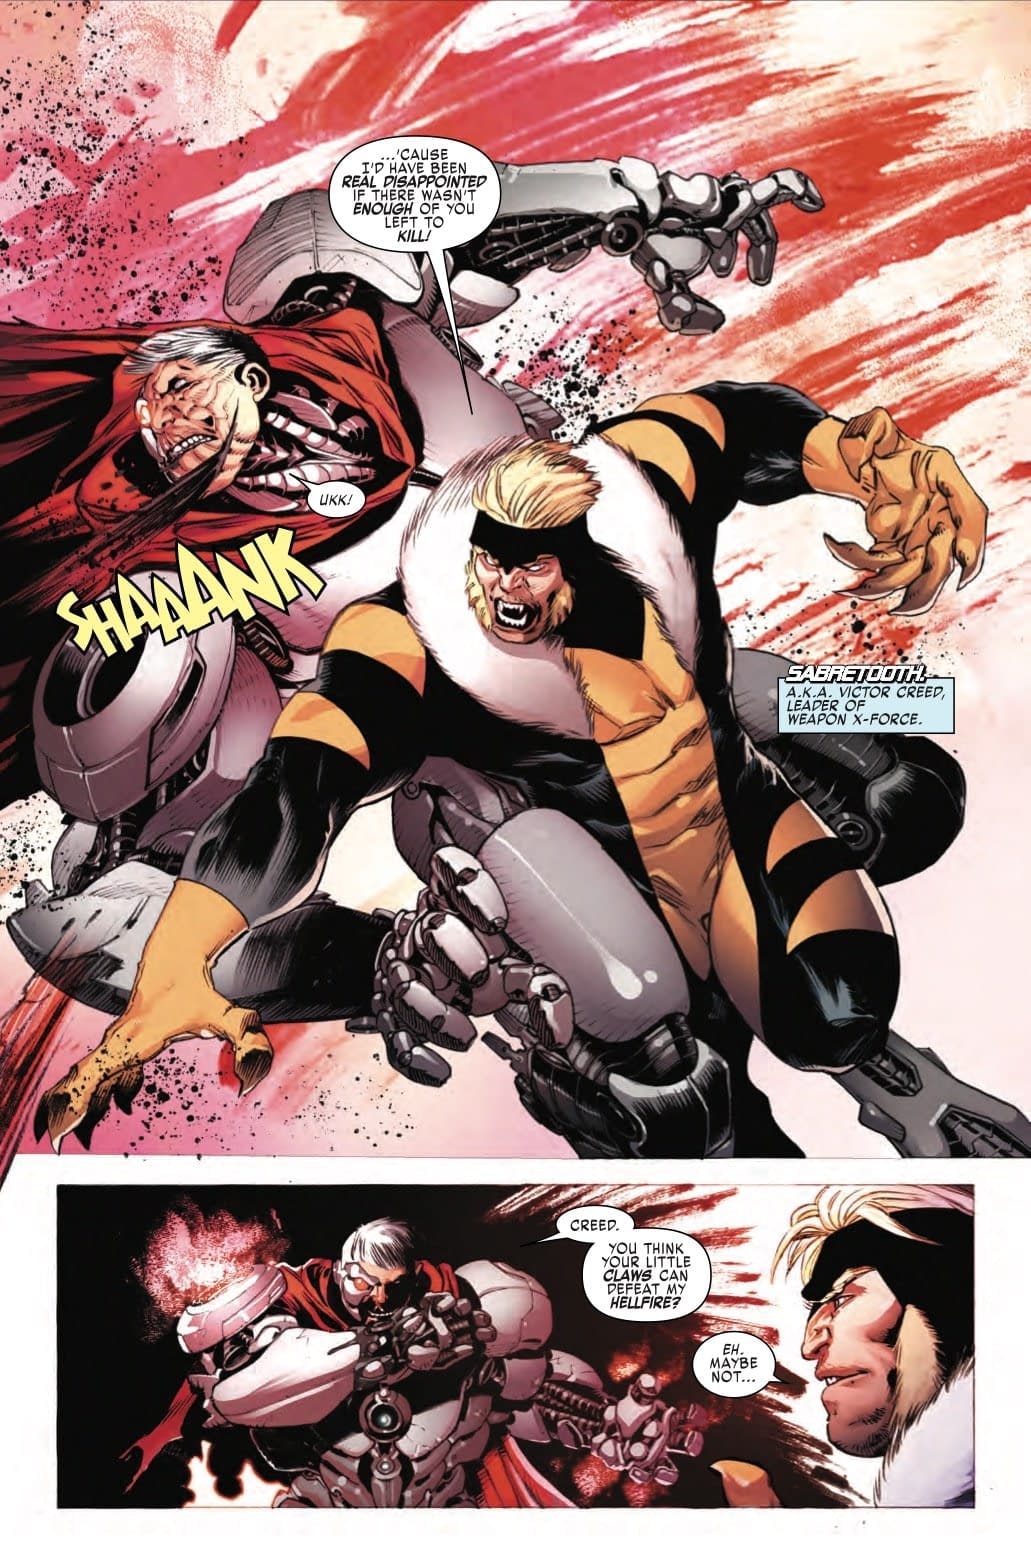 William Stryker Finds His Final Form in Next Week's Weapon X #25?